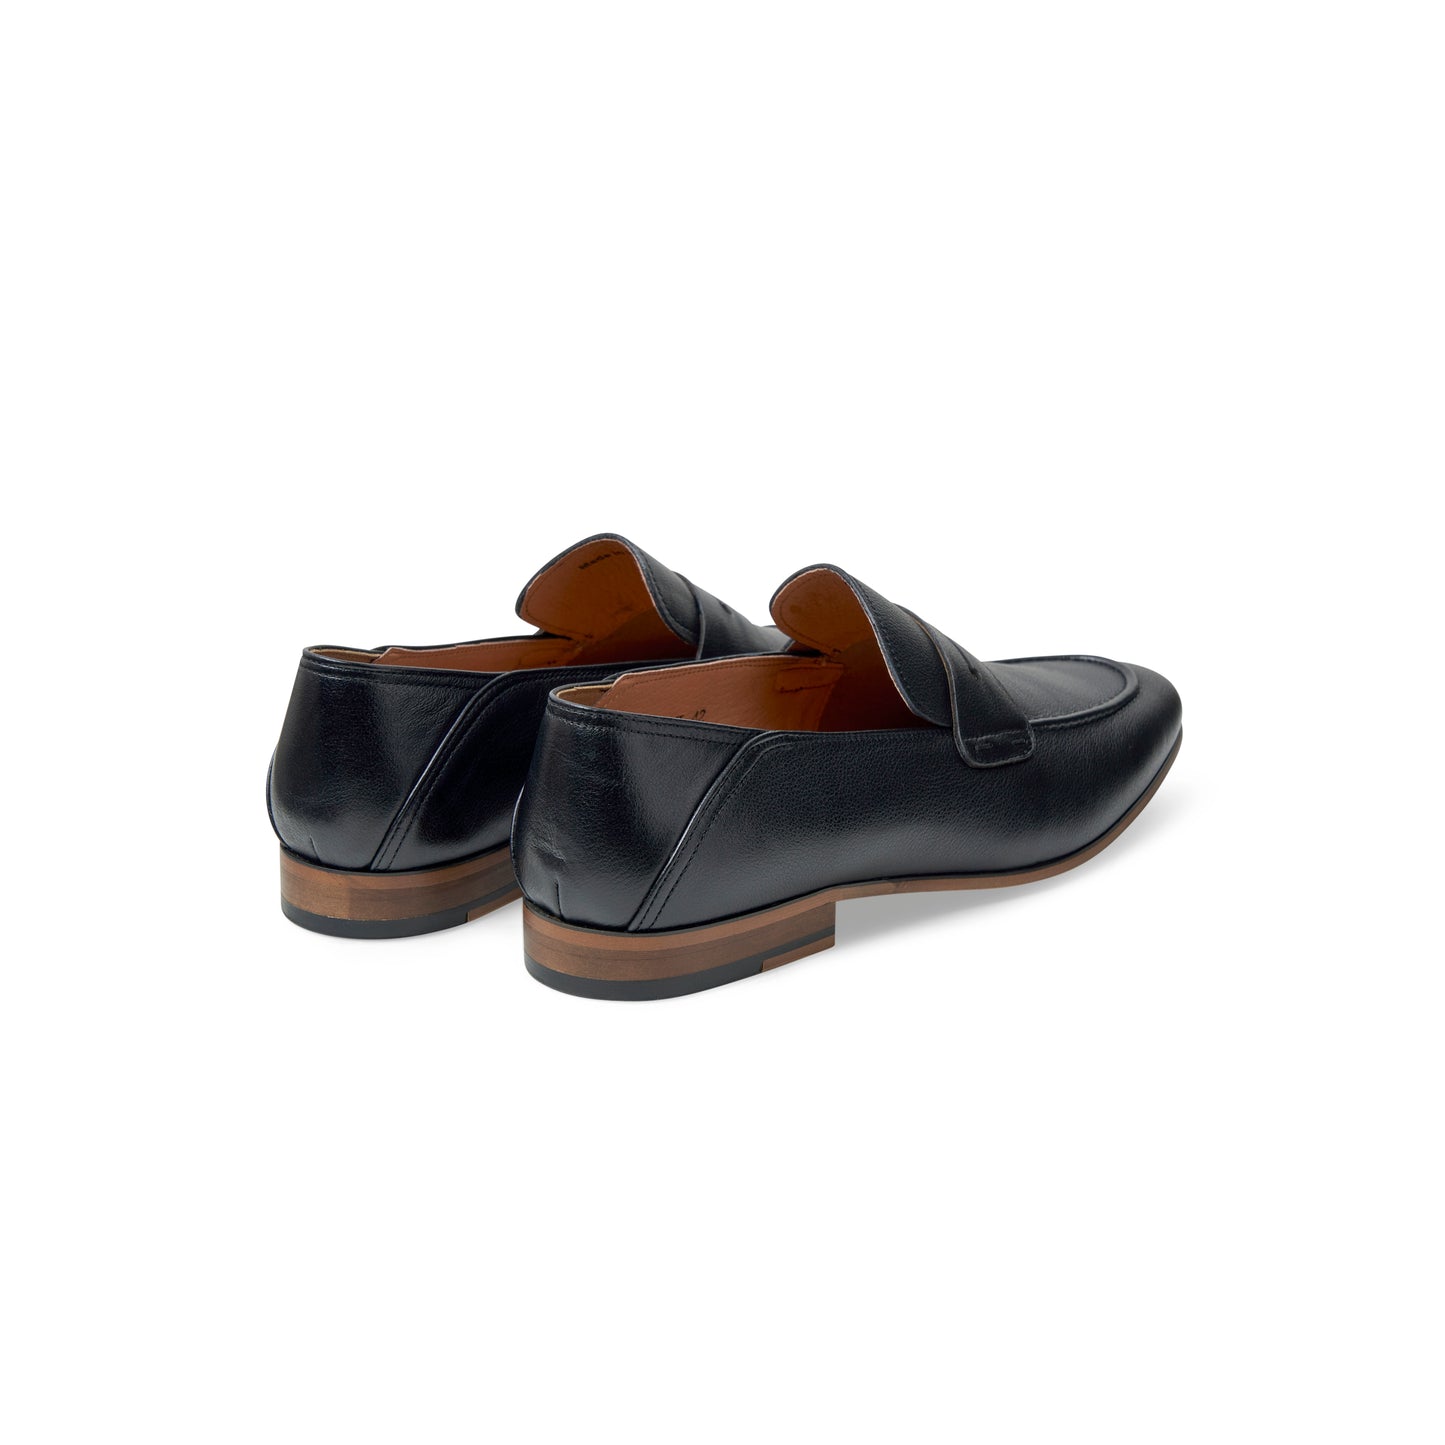 Pair image from behind of Alexi Loafers in Black